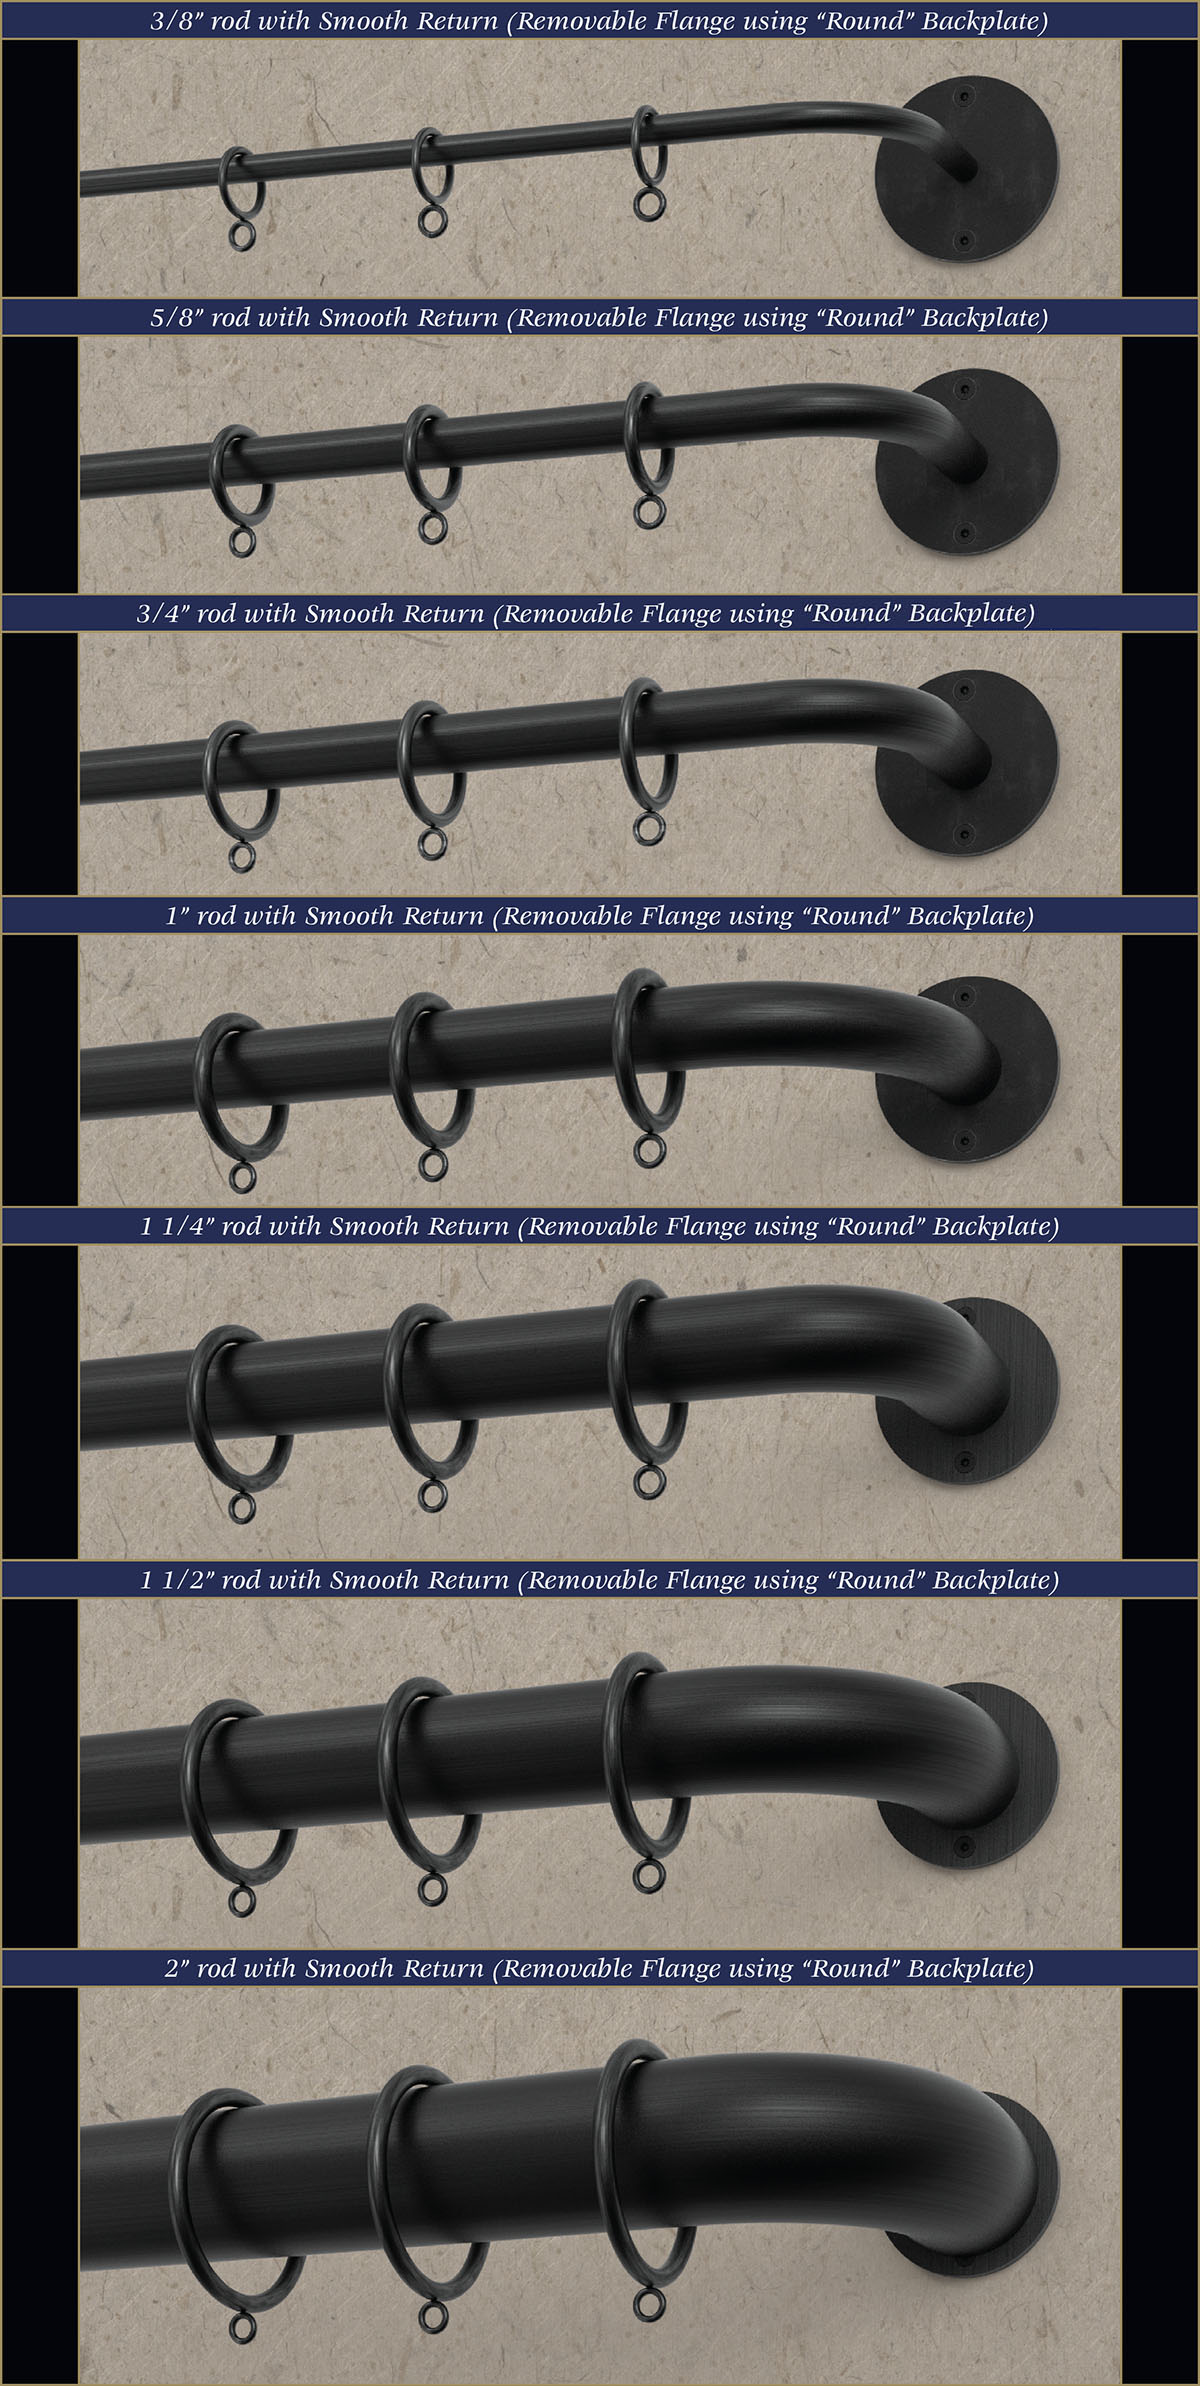 Smooth French return curtain rods with round backplates